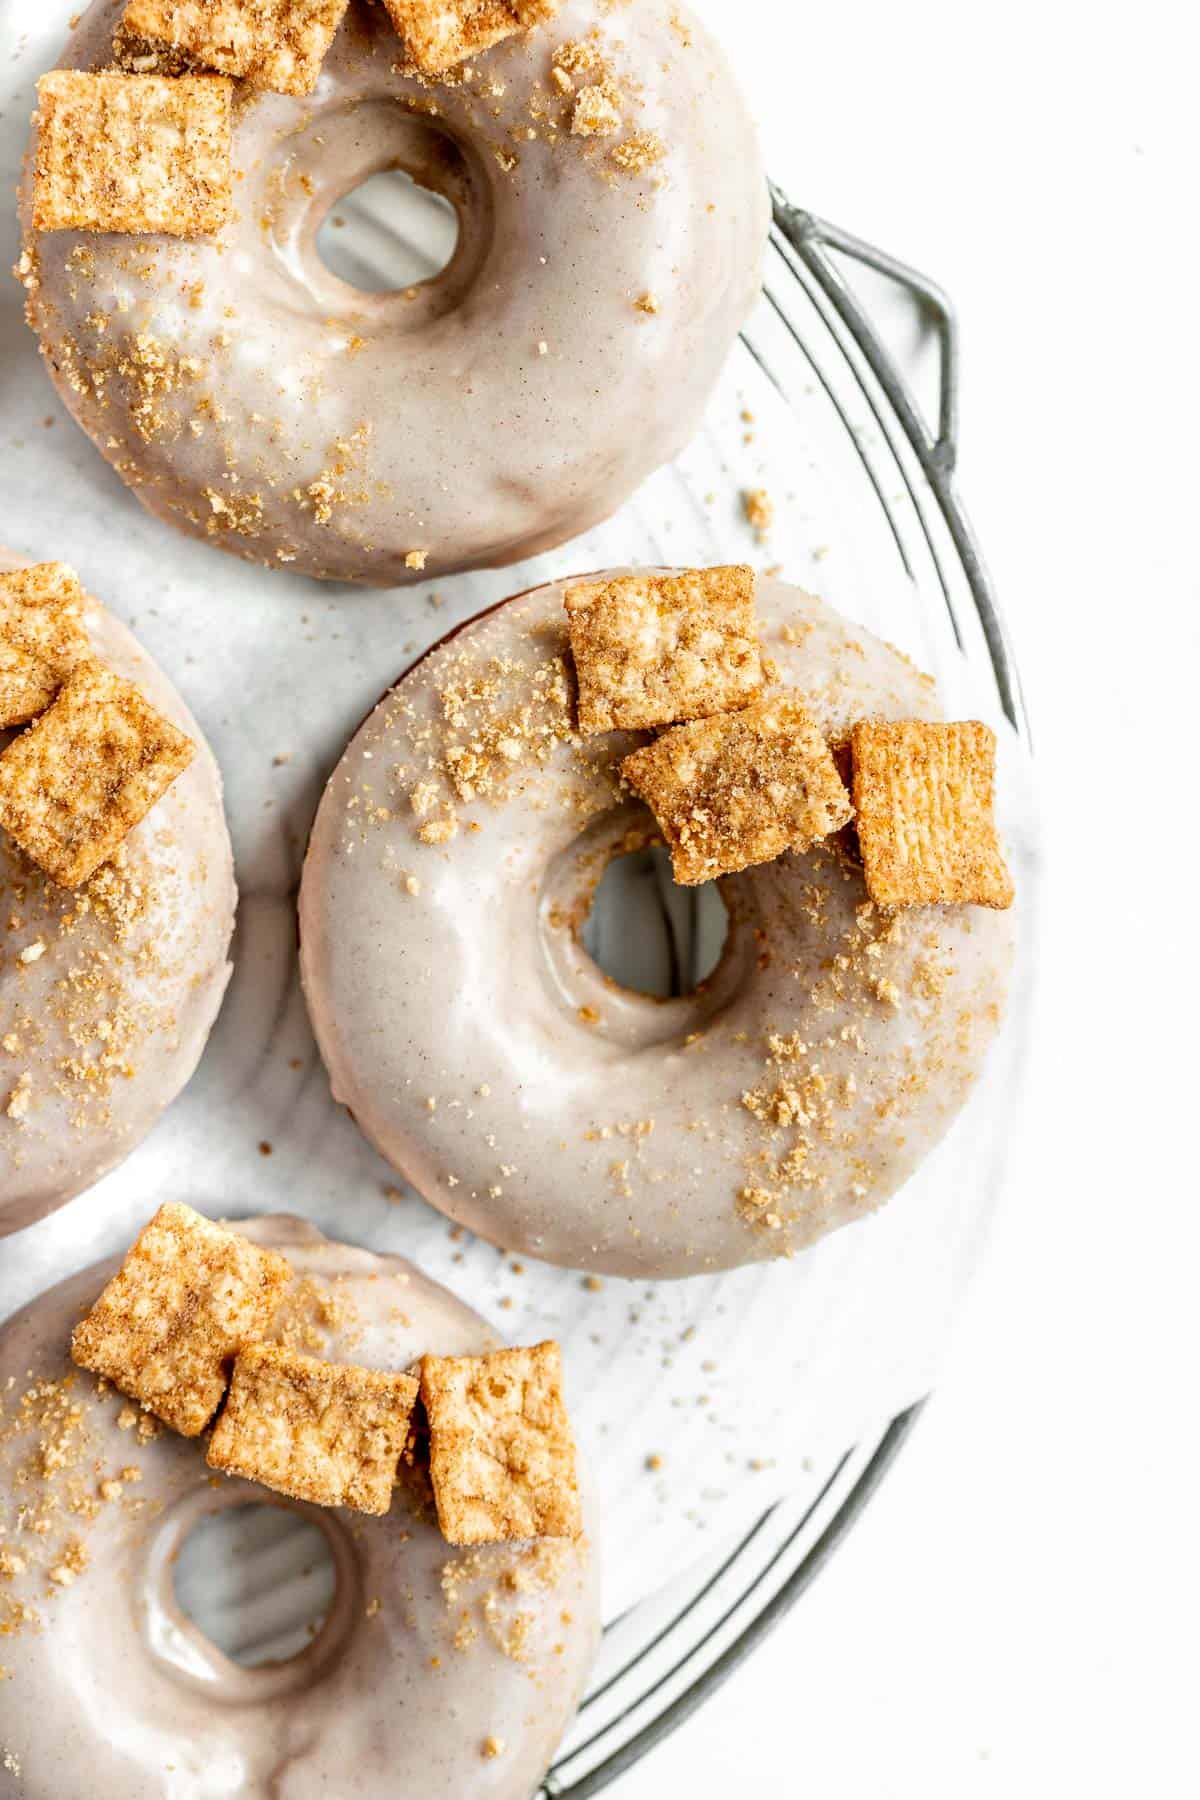 Cinnamon Toast Crunch donuts finished.